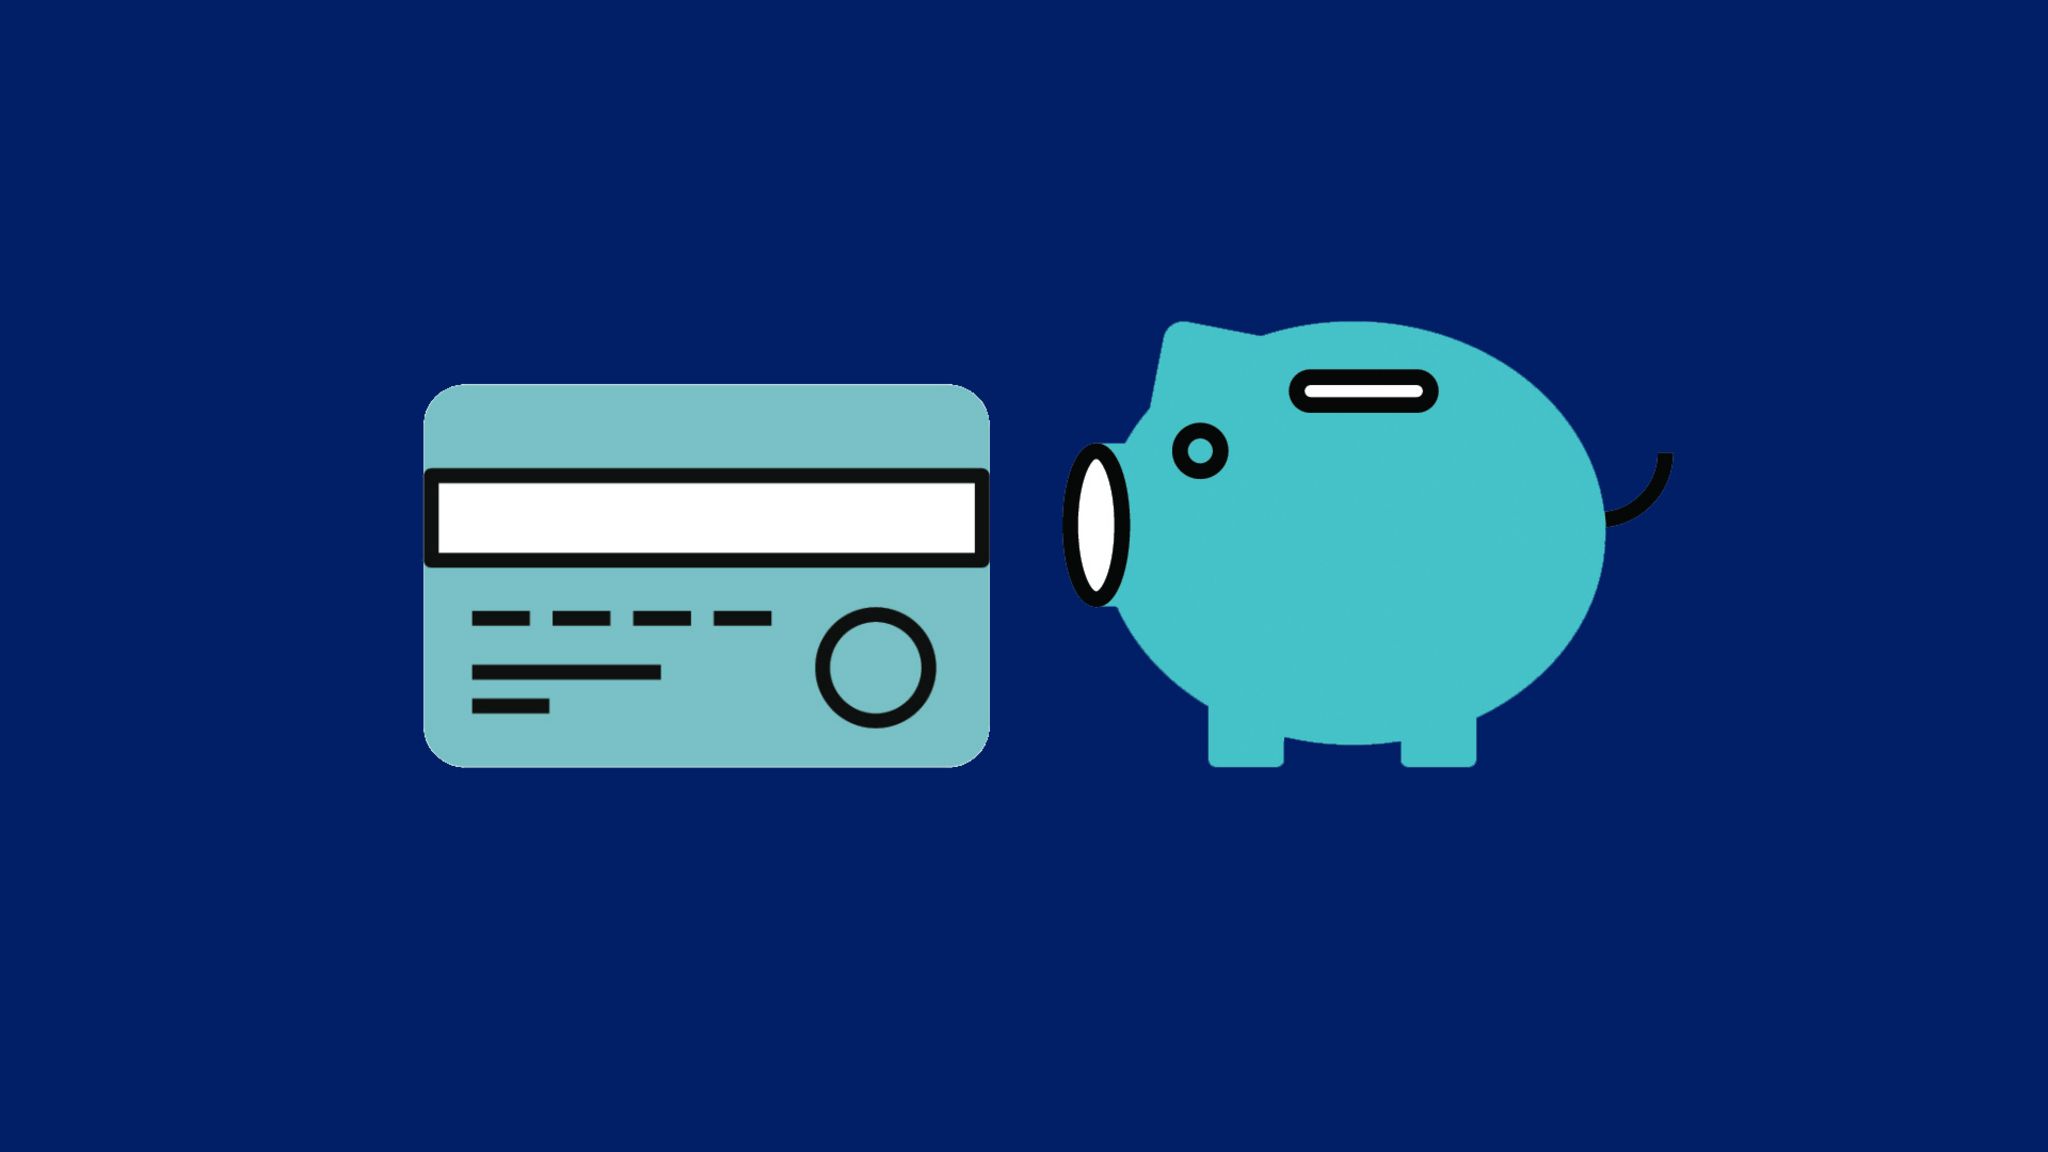 Credit card and piggy bank